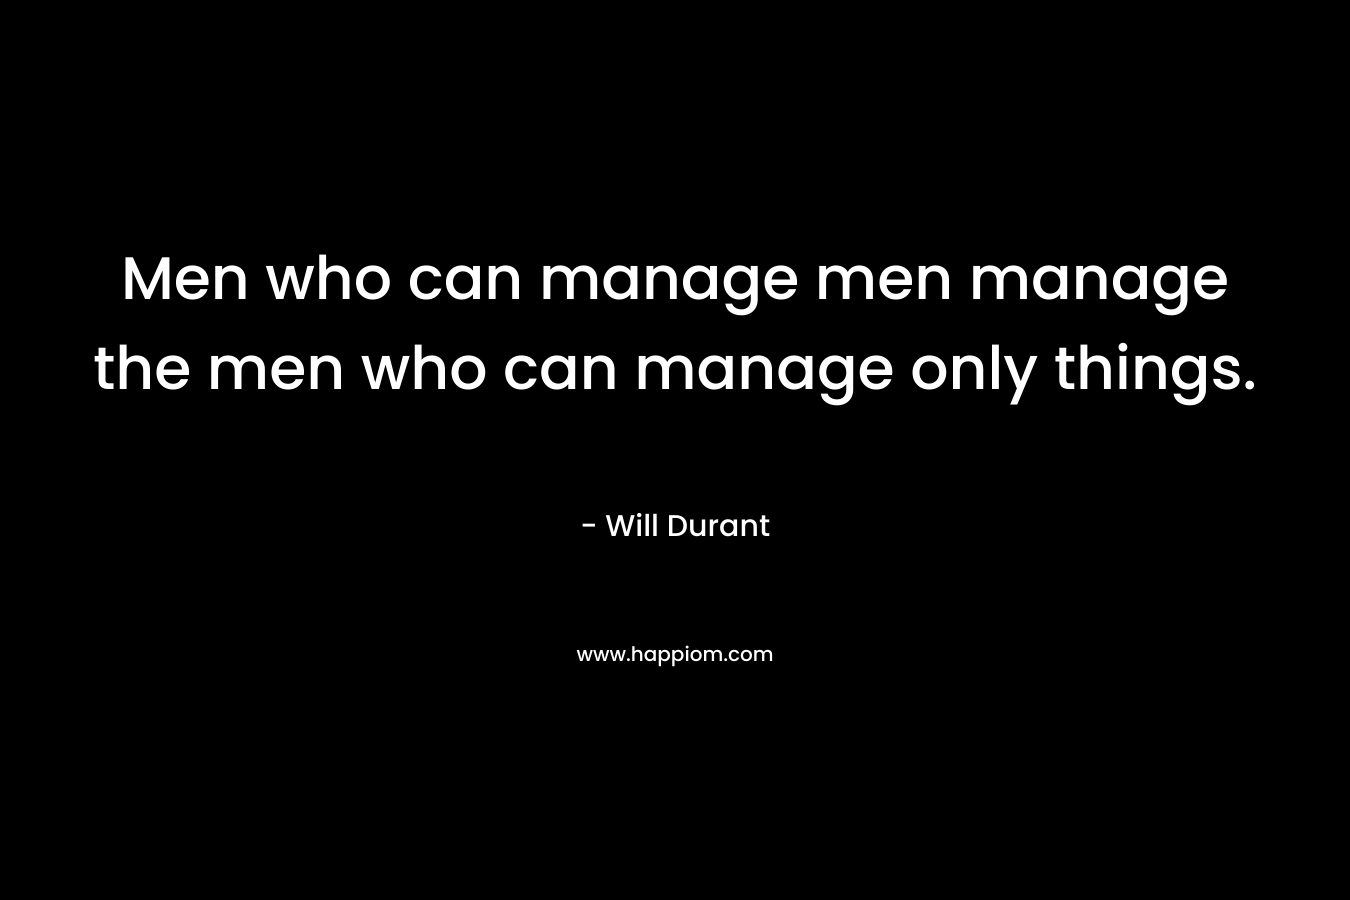 Men who can manage men manage the men who can manage only things.